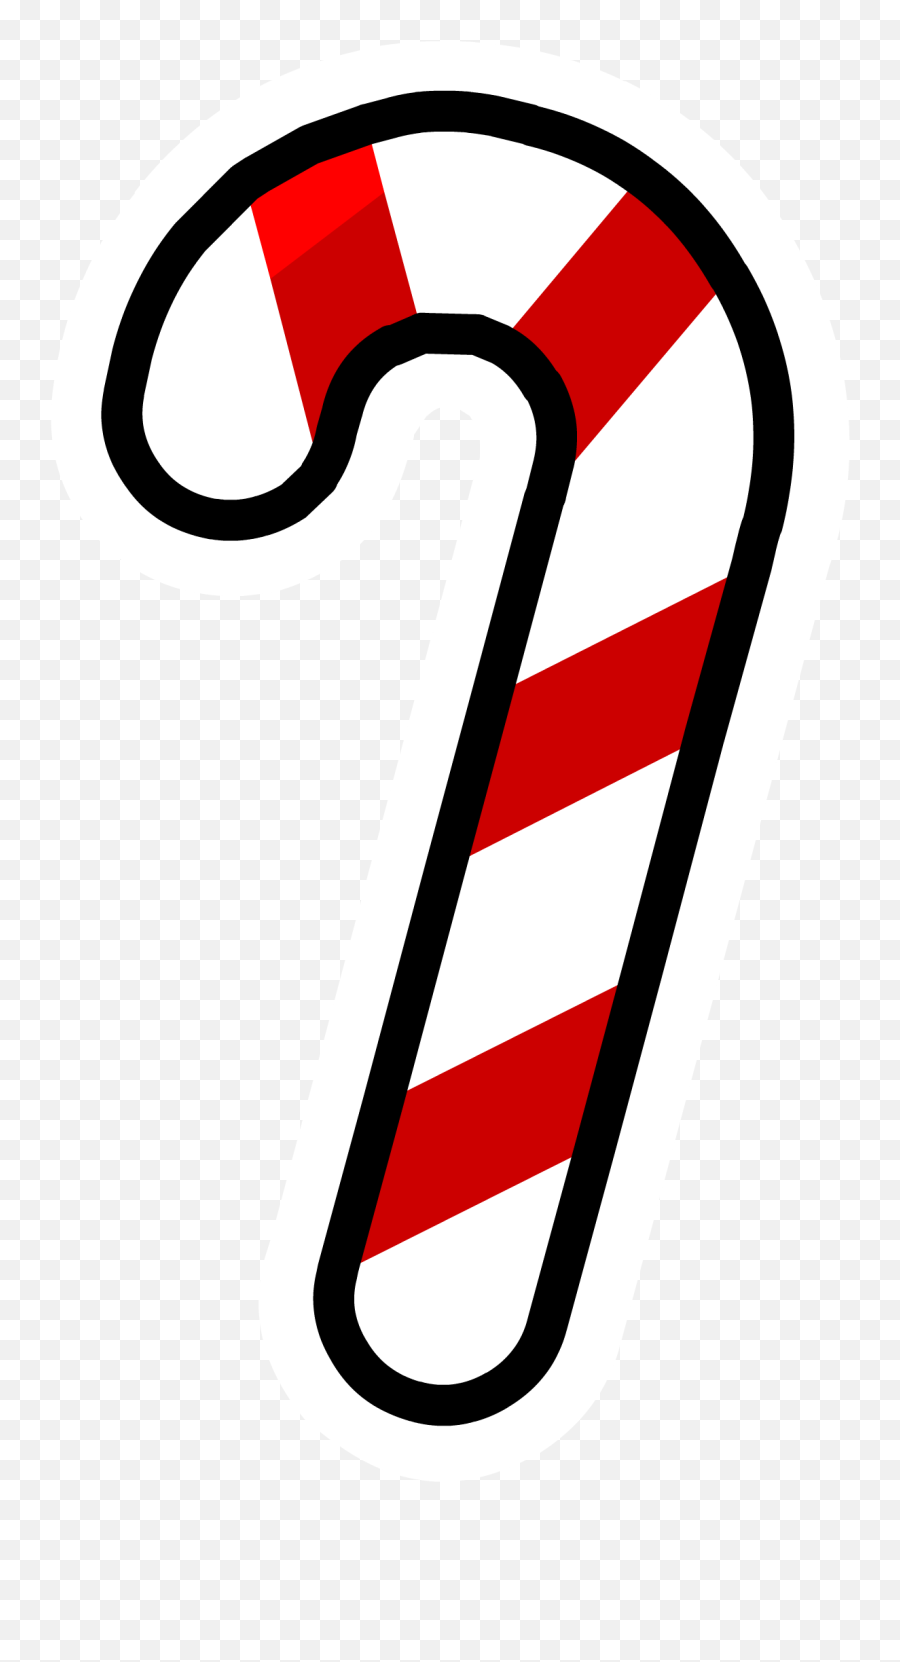 Peppermint Clipart Candy Cane Peppermint Candy Cane - Candy Cane Clipart Transparent Emoji,Candy Emoji